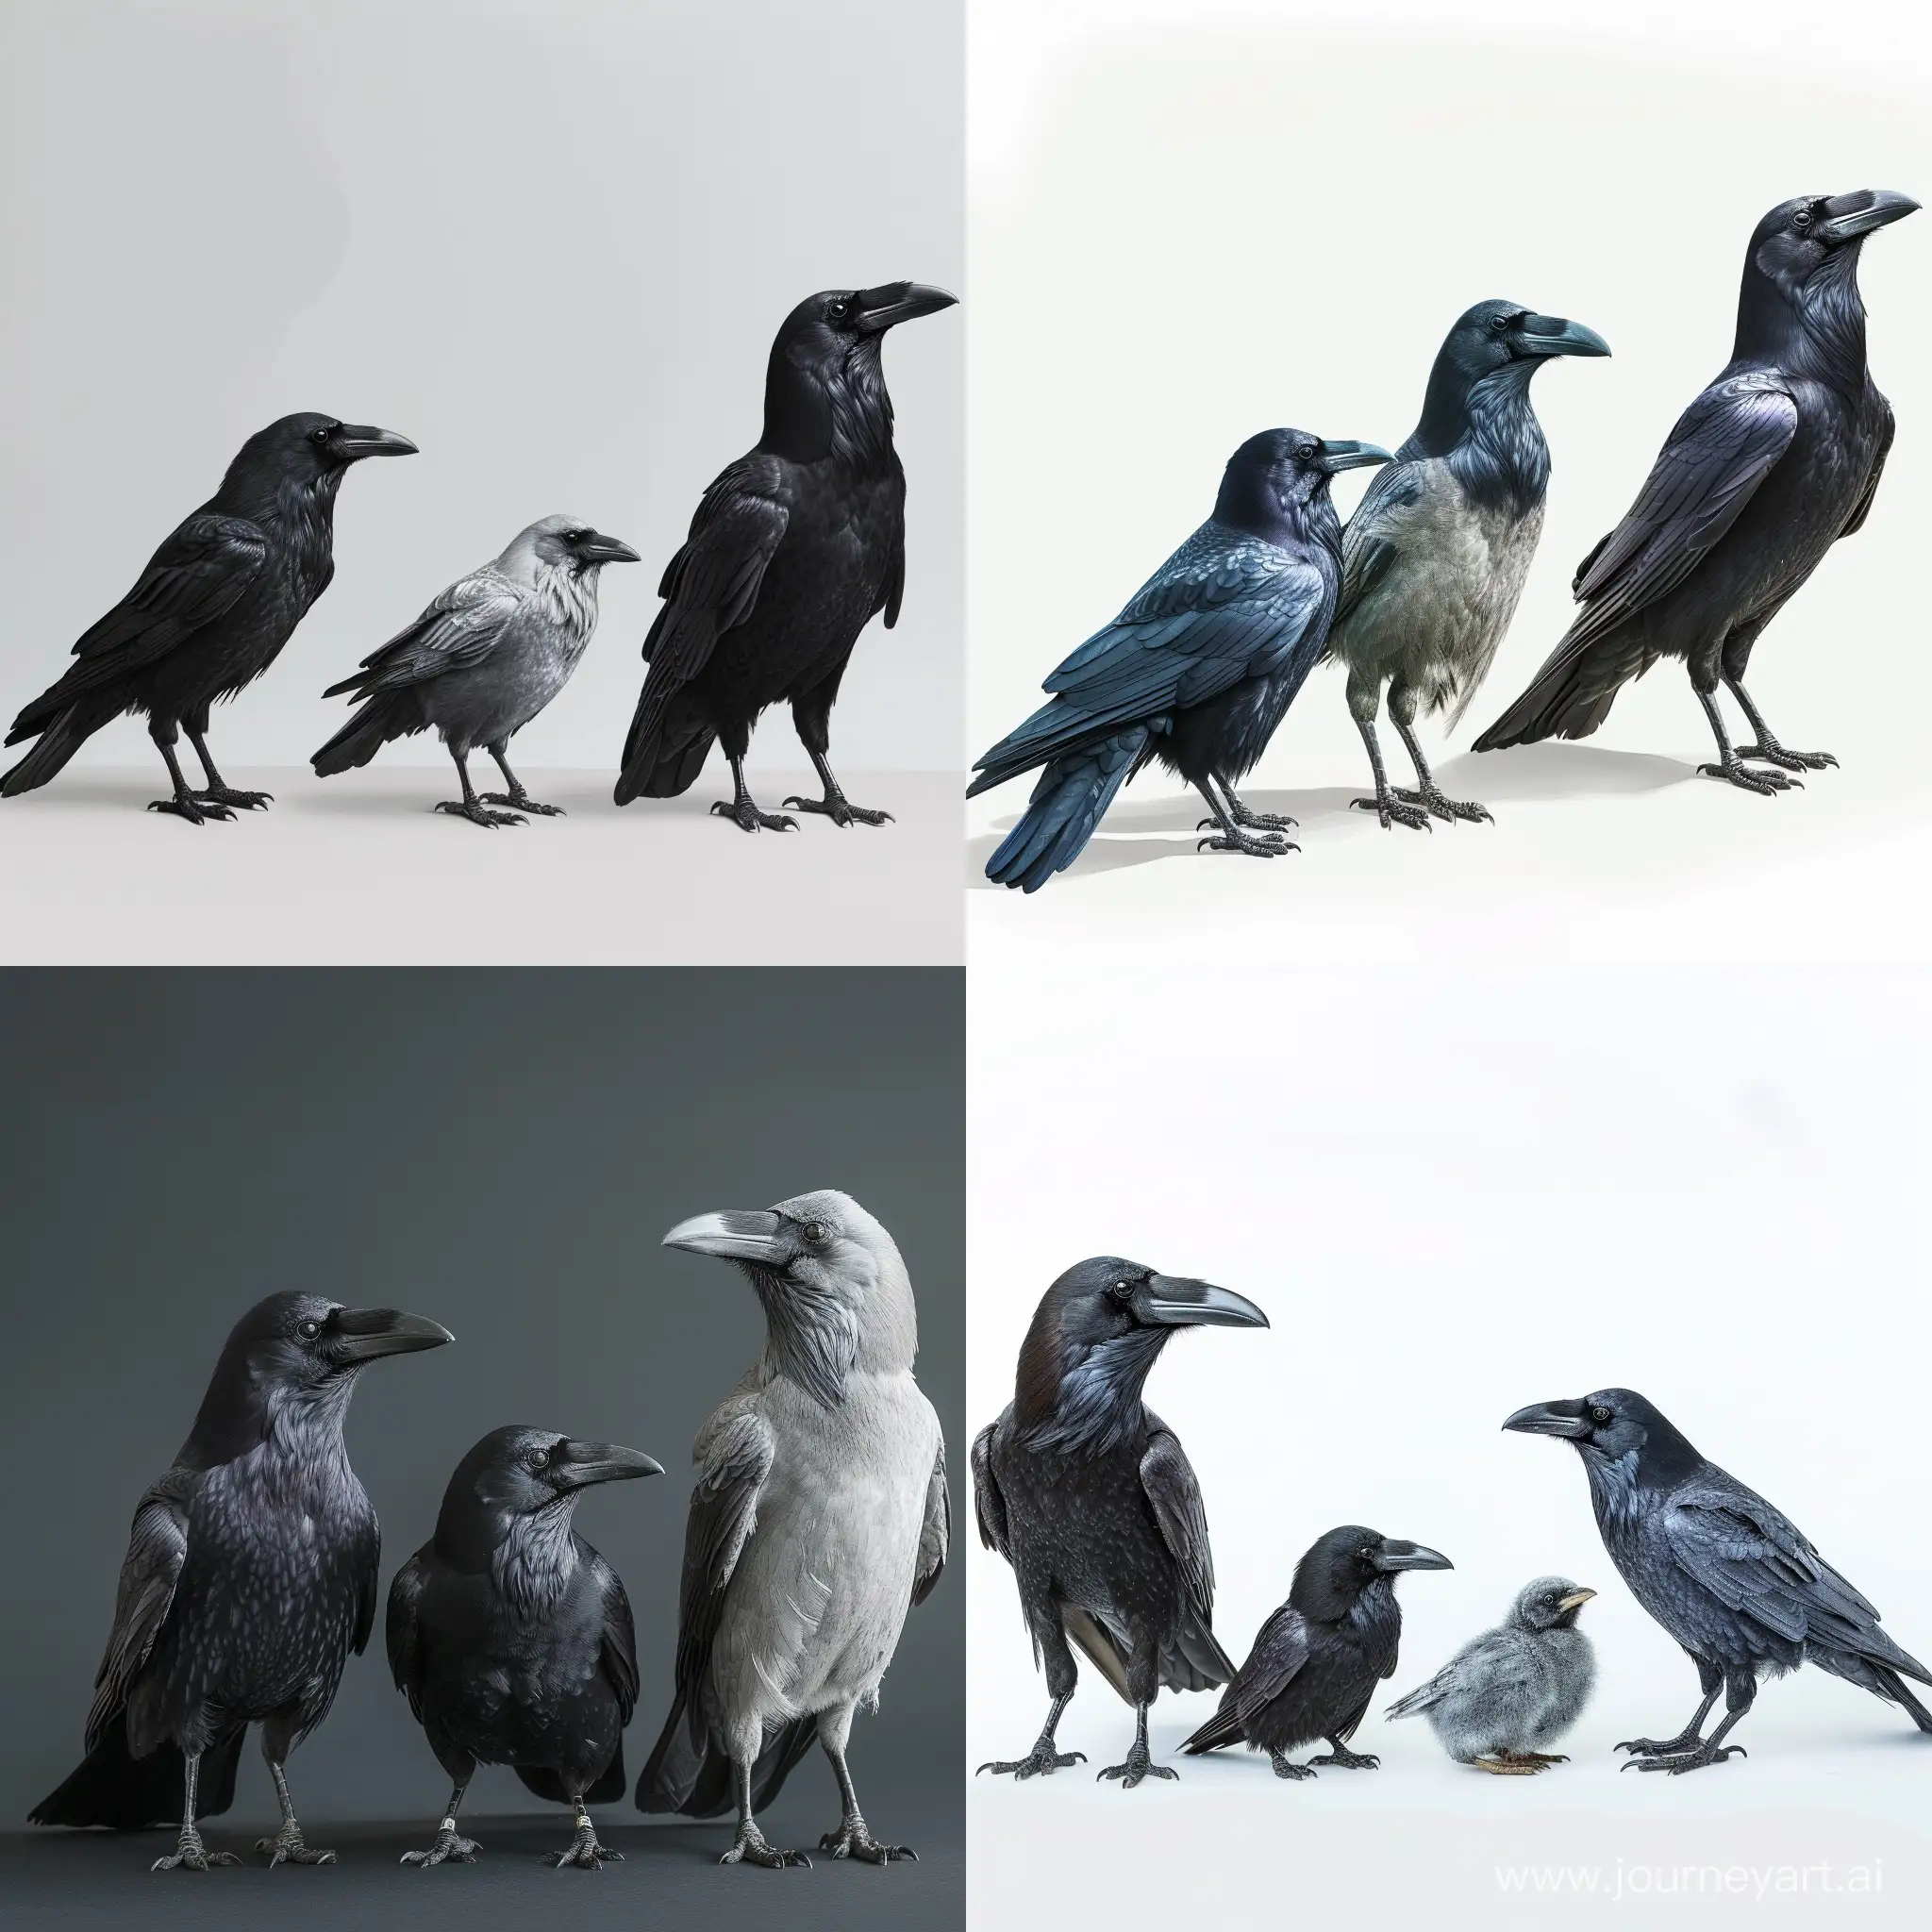 Crow, raven, rook and jackwad next to each other, ordered by size. Photorealistic.